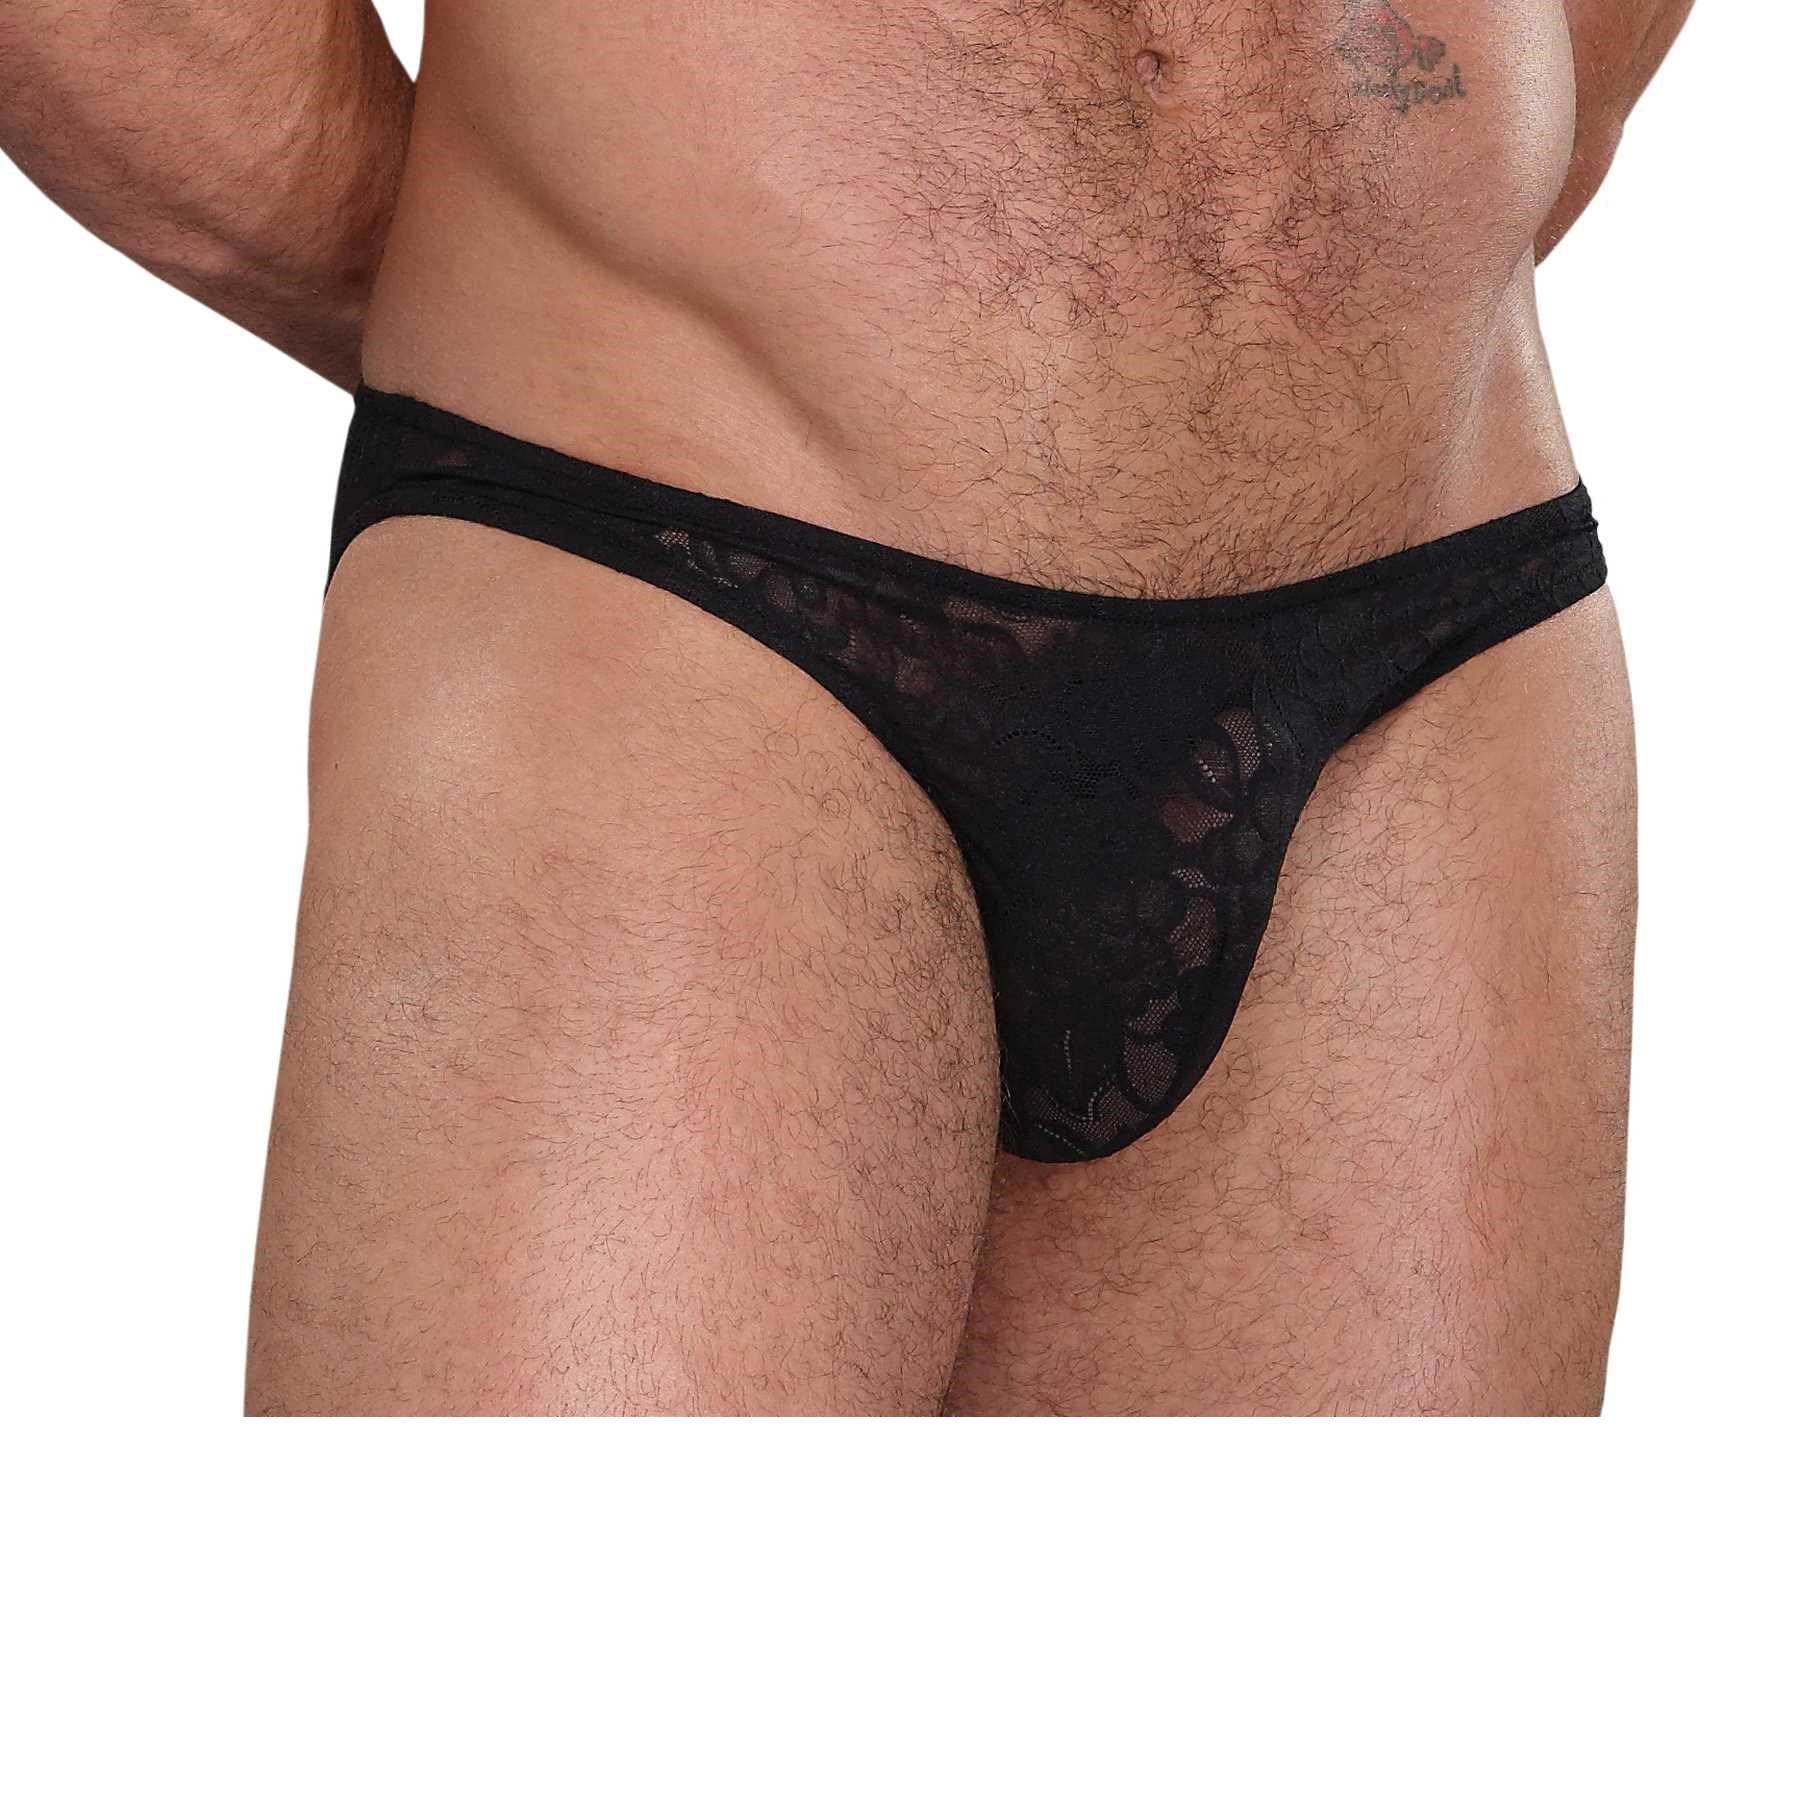 Stretch Lace Bong Thong on male model